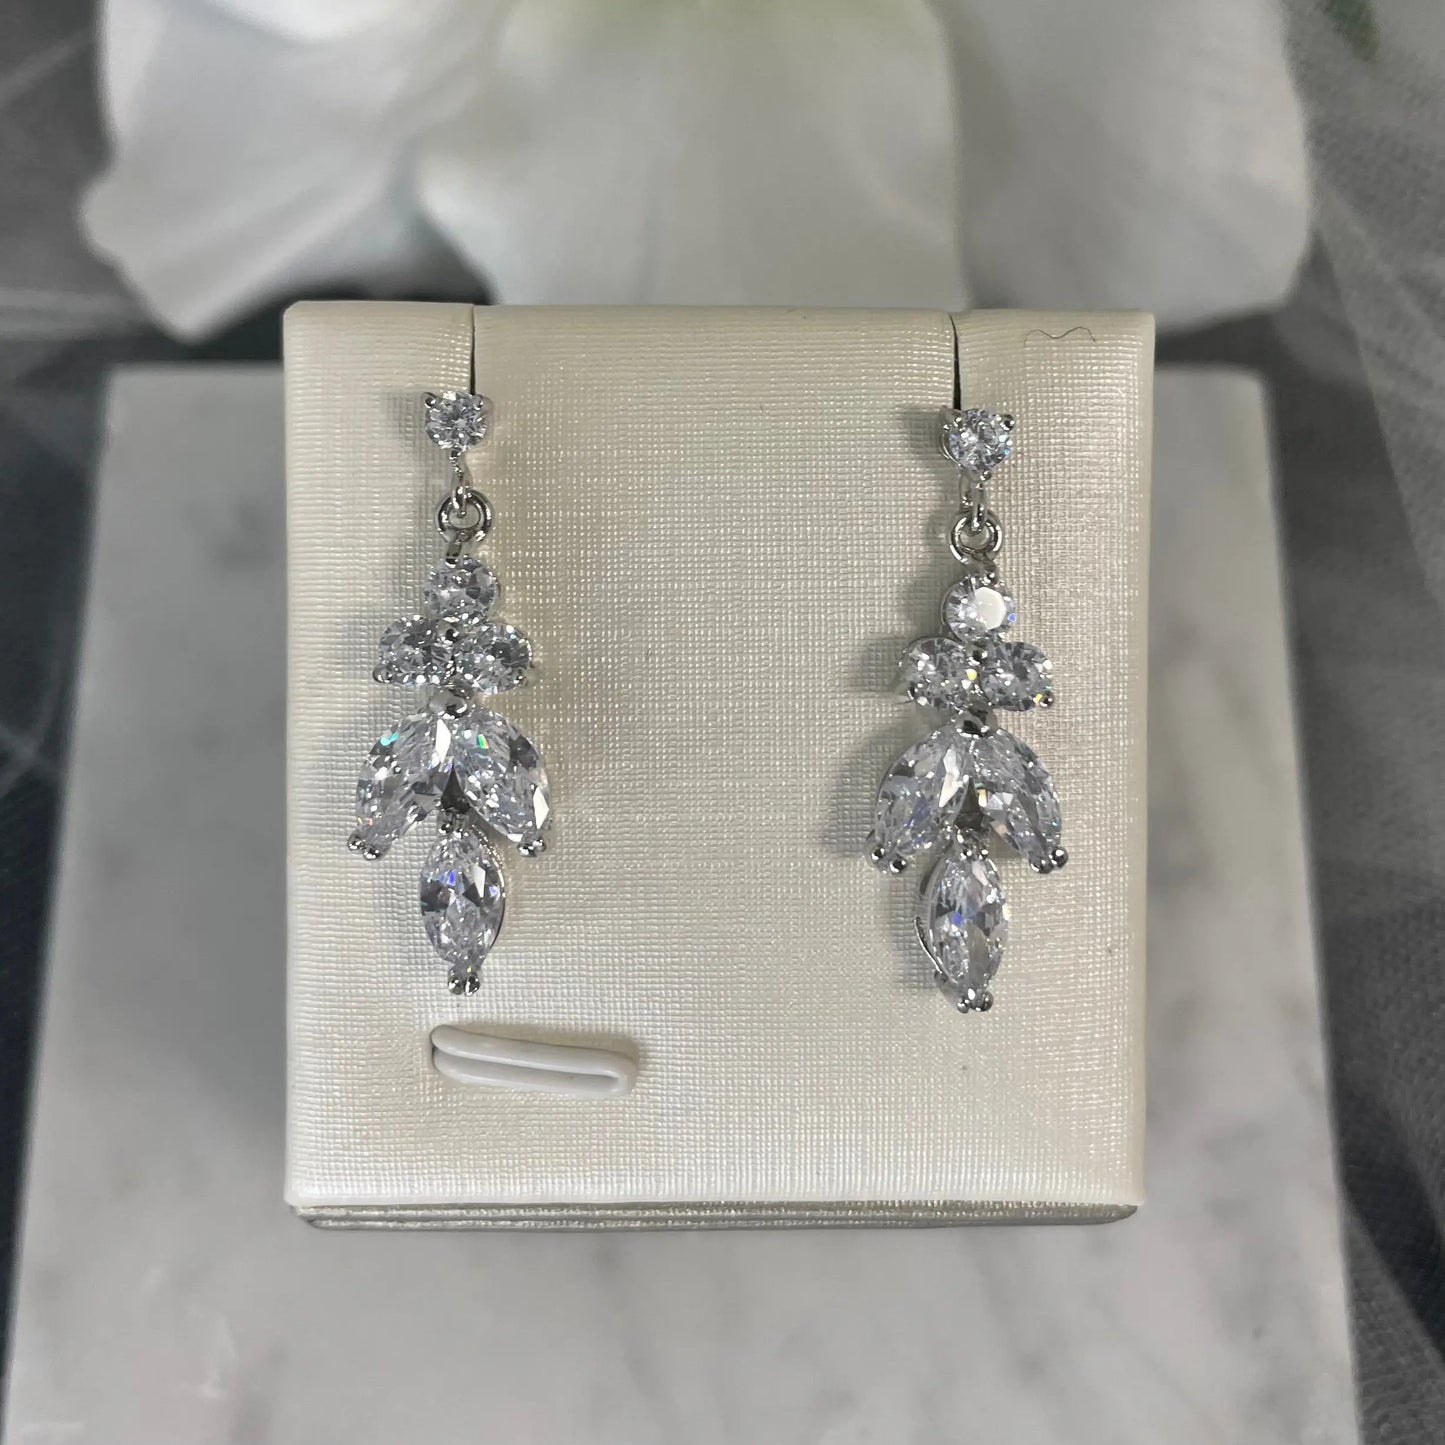 Silver Earrings: Sophisticated silver earrings with a leaf and flower design and clear cubic zirconia.